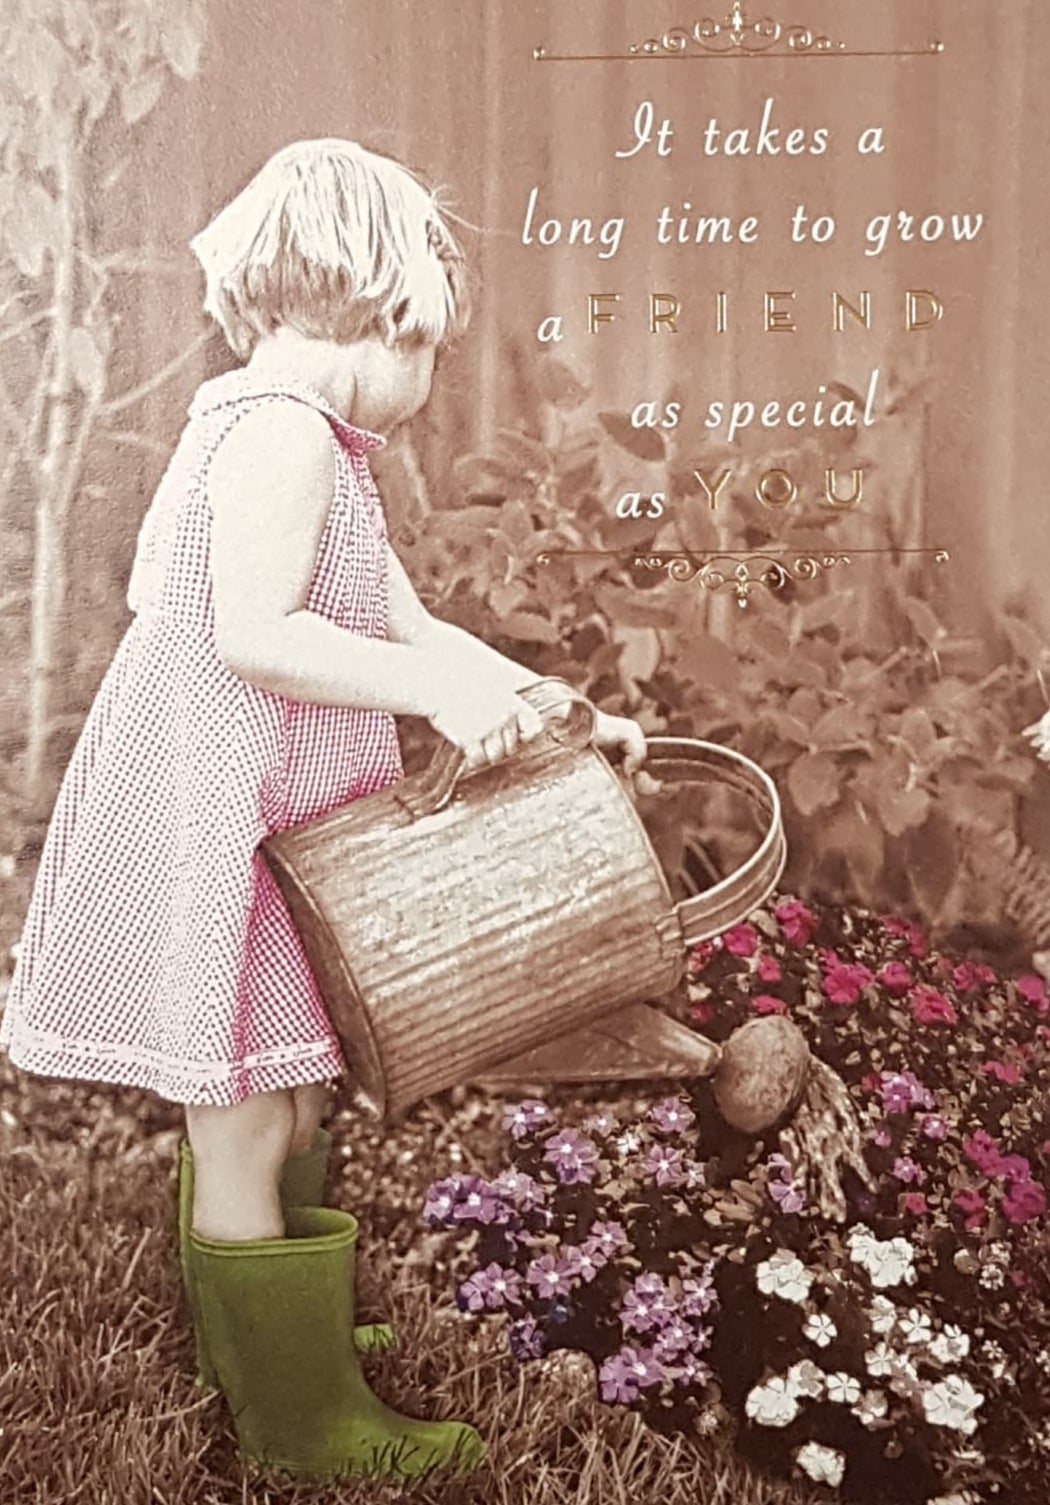 Birthday Card - Special Friend / Girl In a Pink Dress Watering Plants